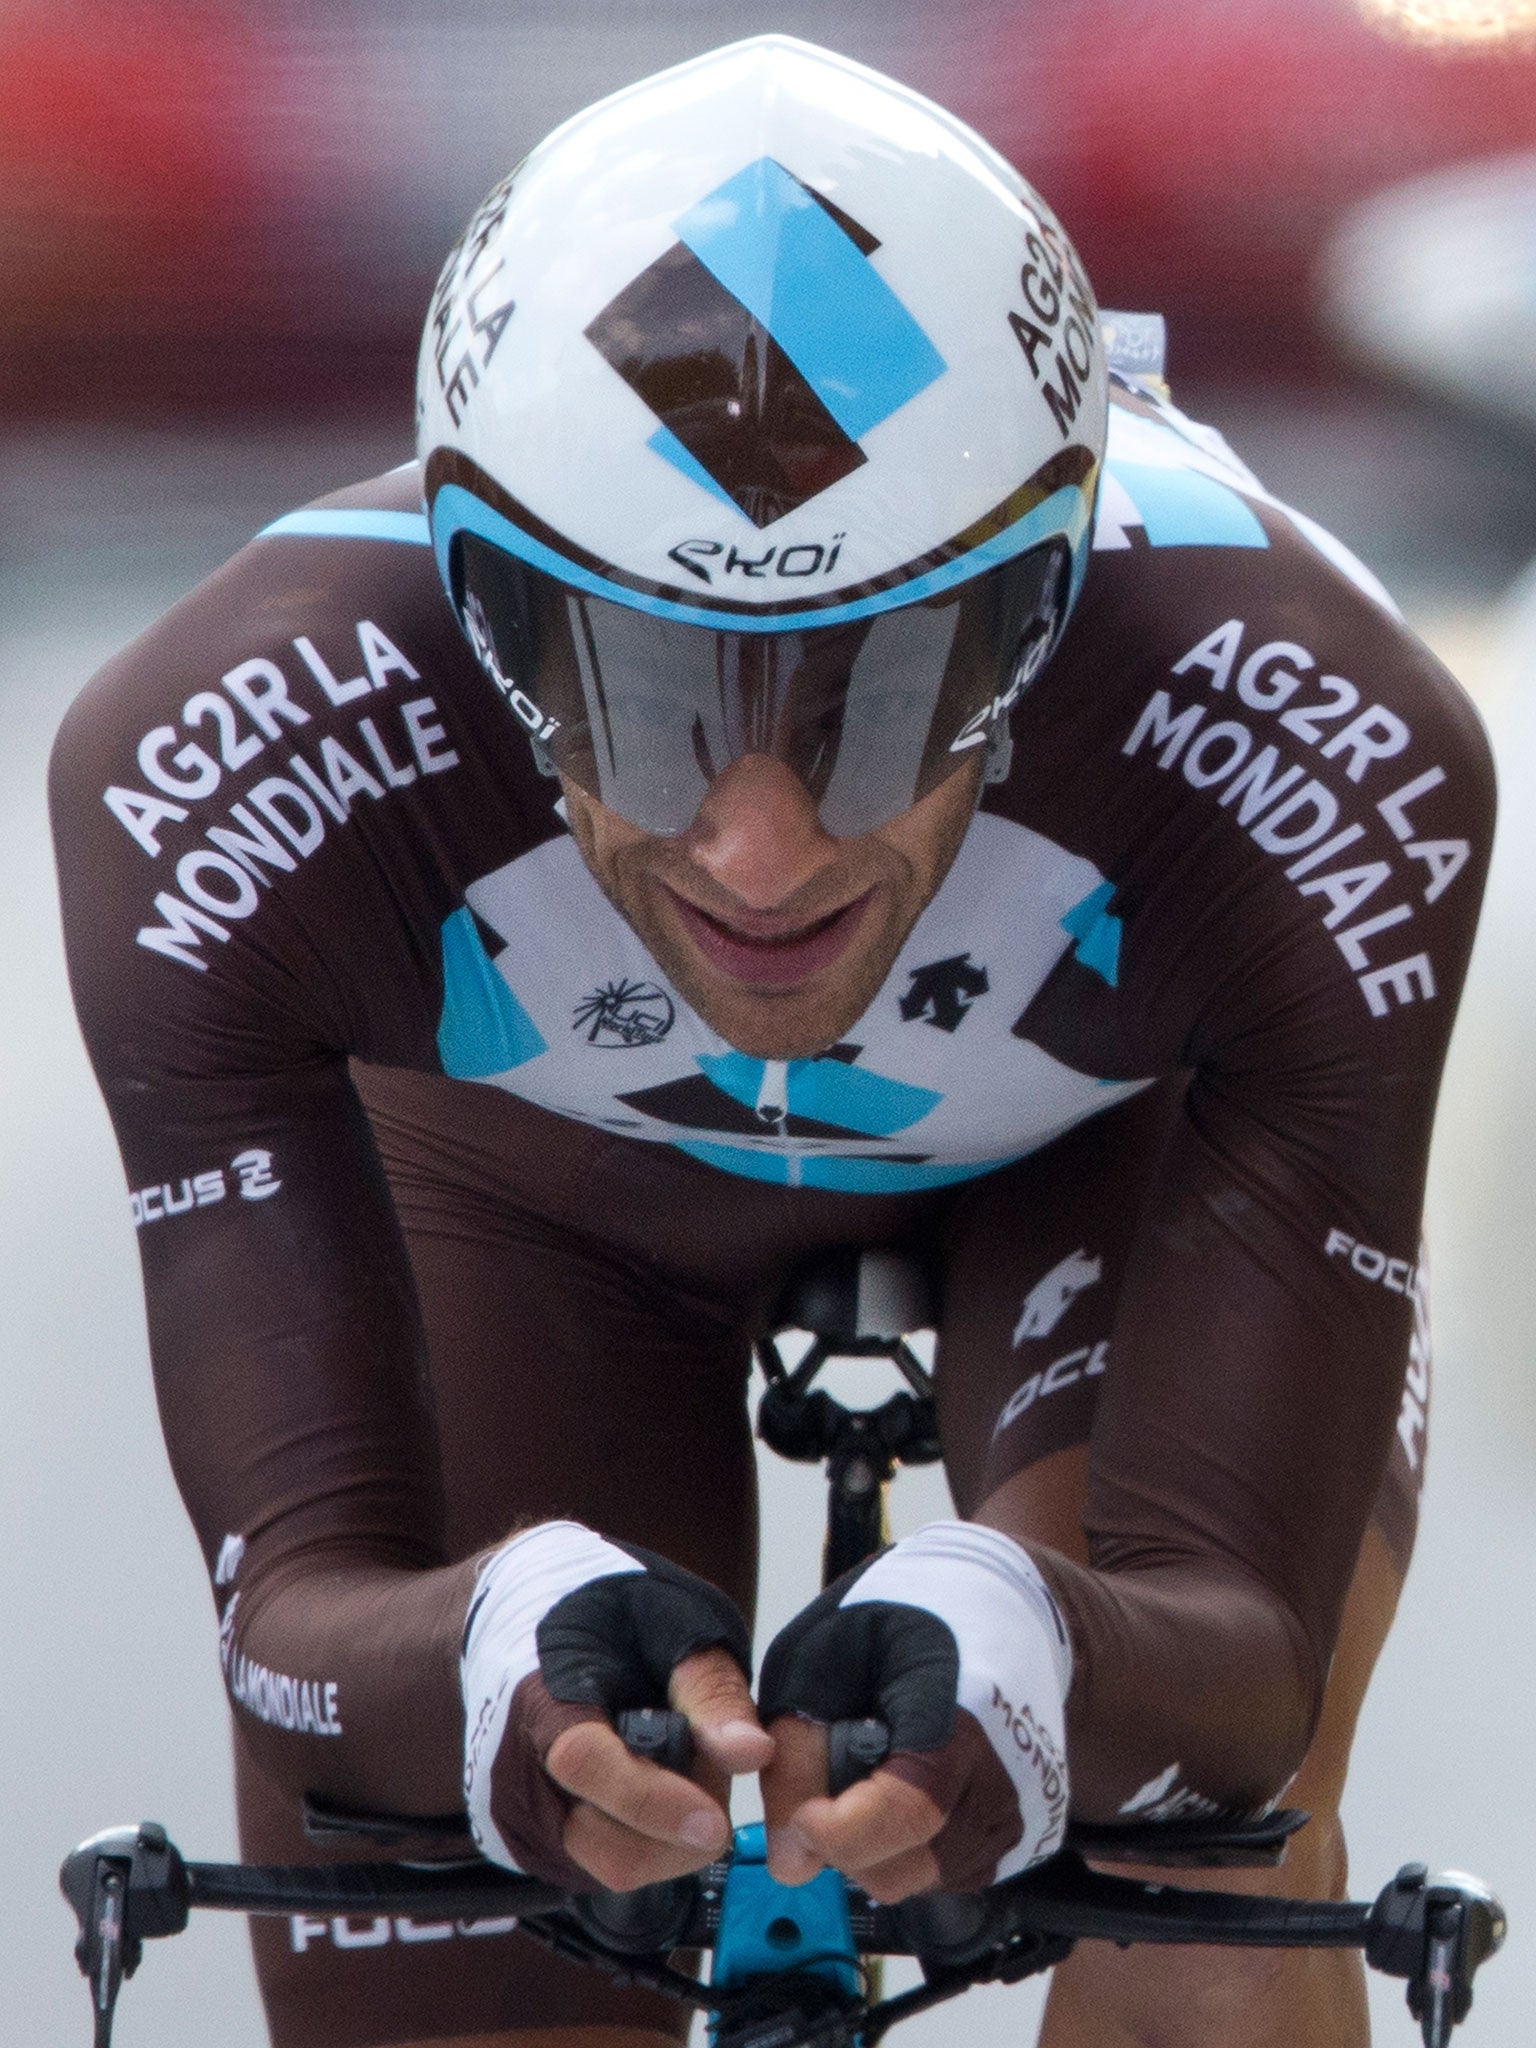 Jean-Christophe Péraud was second in this year’s Tour